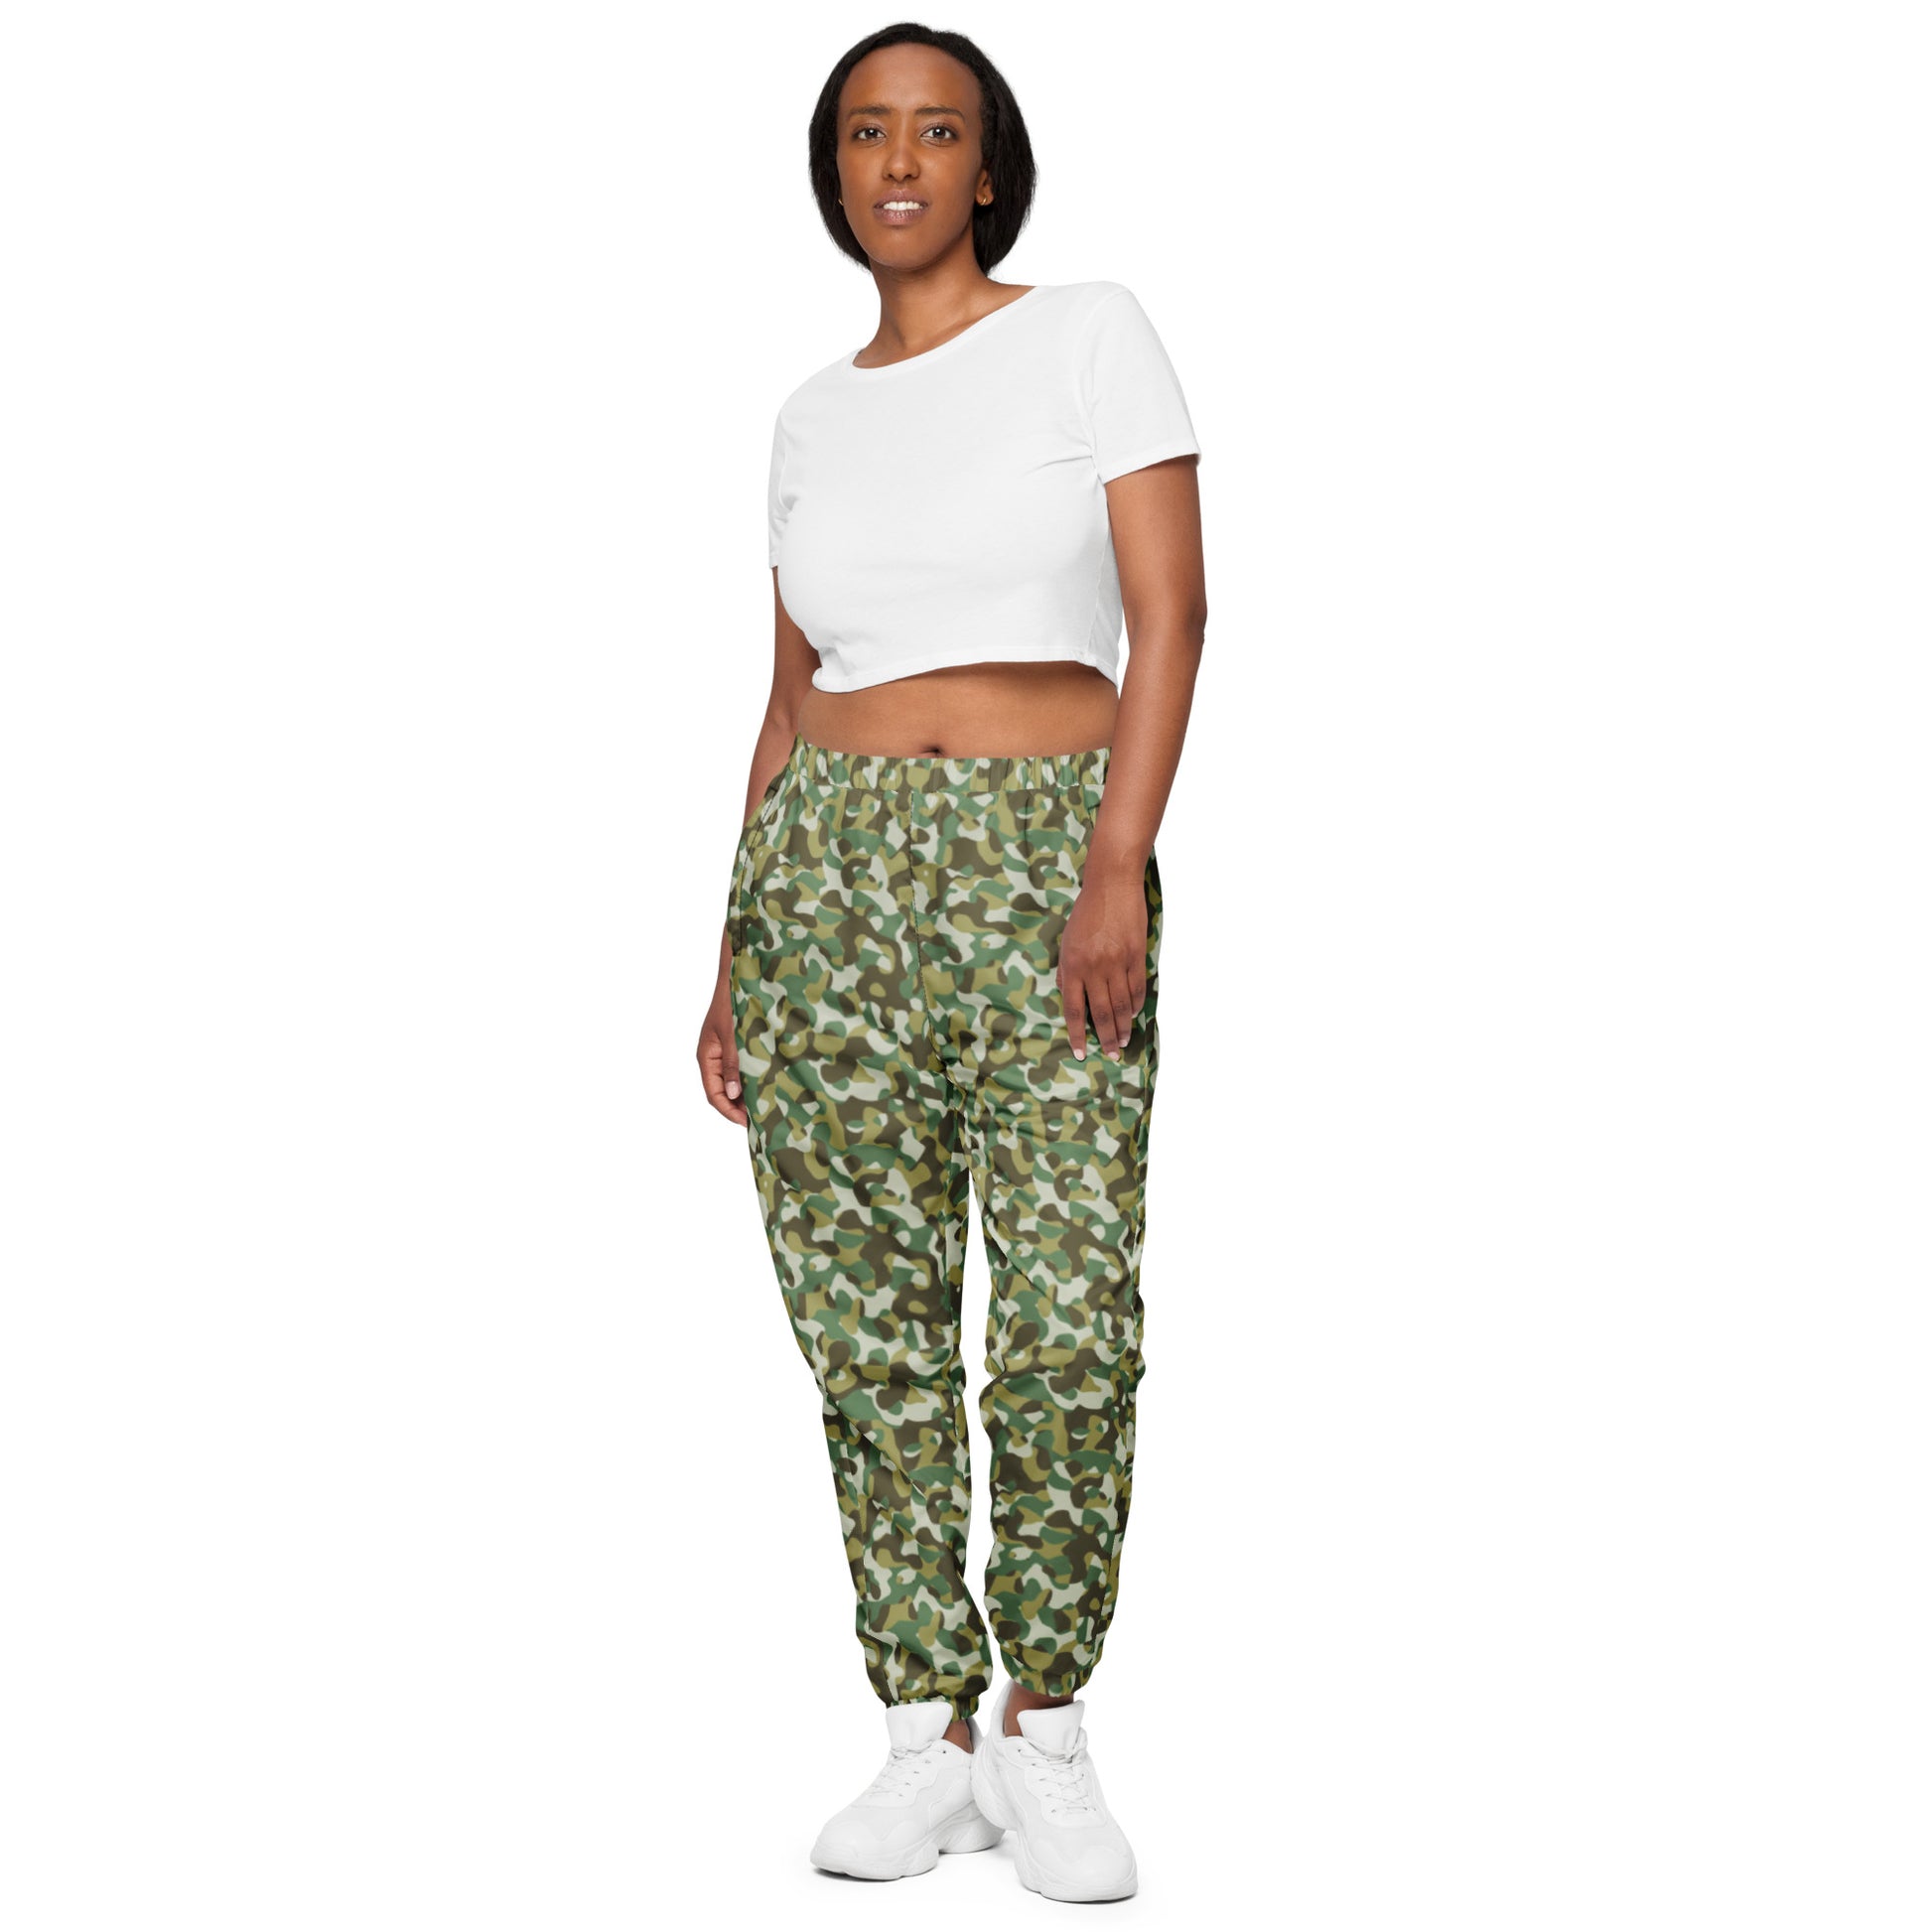 Camouflage Print track pants - XS - Sport Finesse